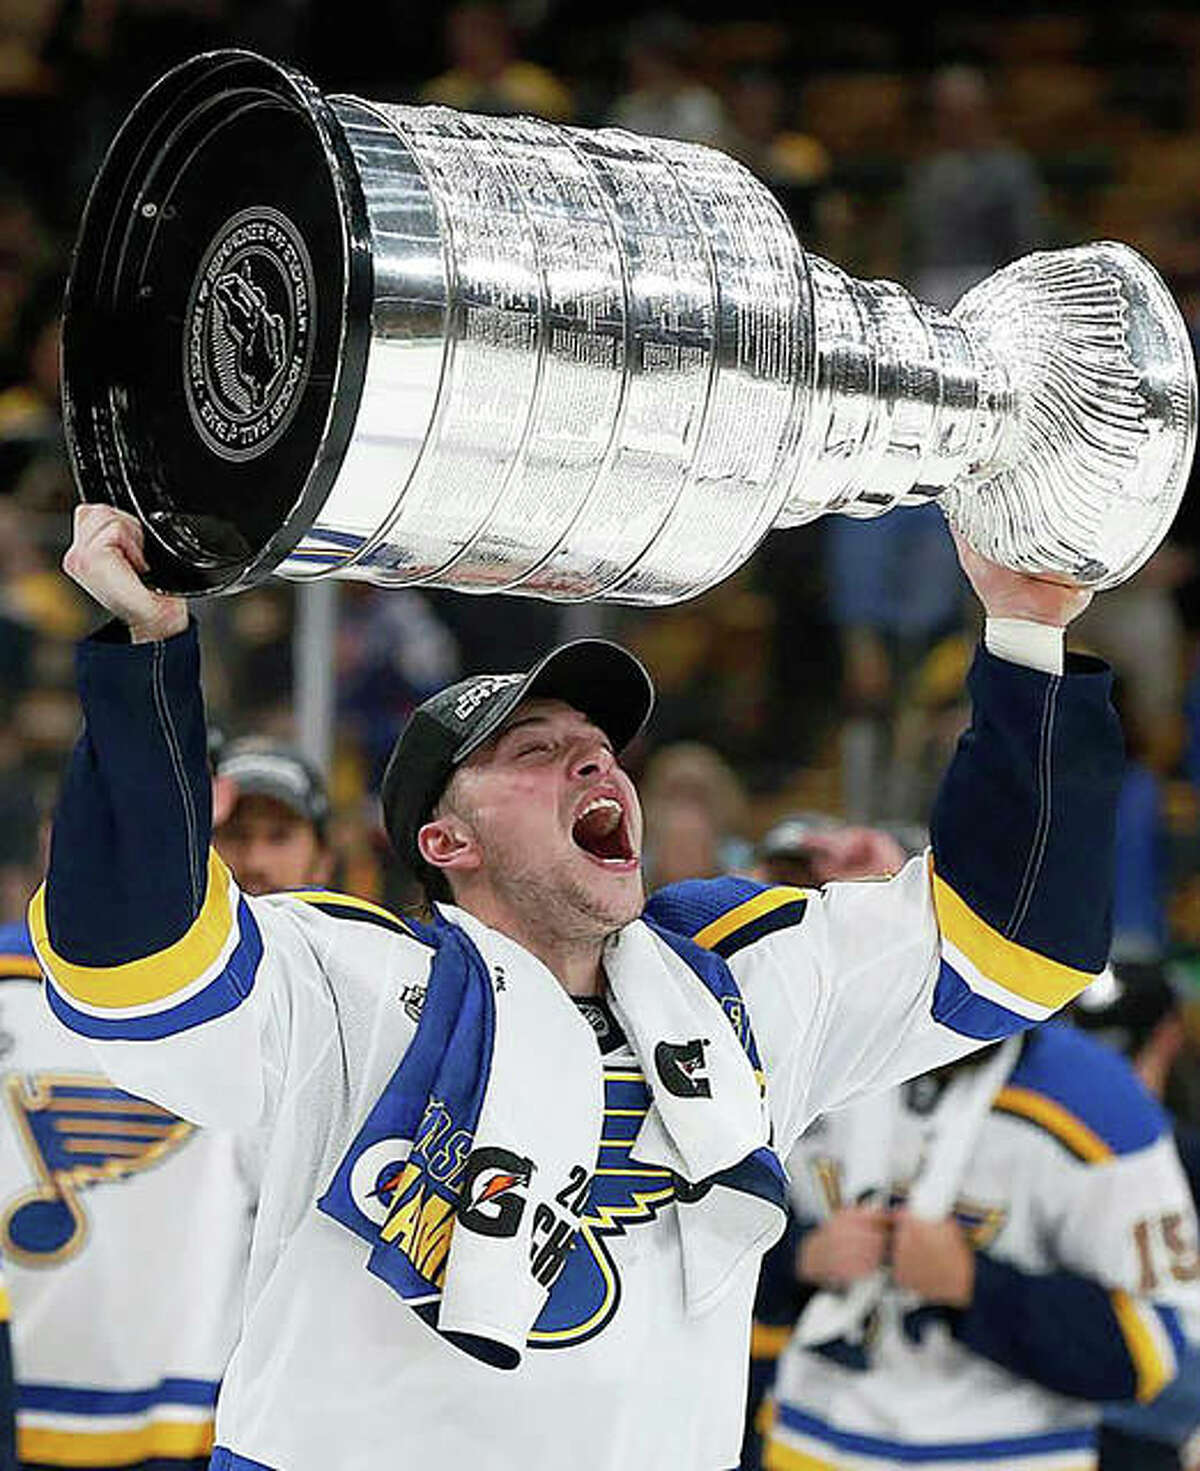 Stanley cup craze: How the 1913 re-brand inspired a viral frenzy